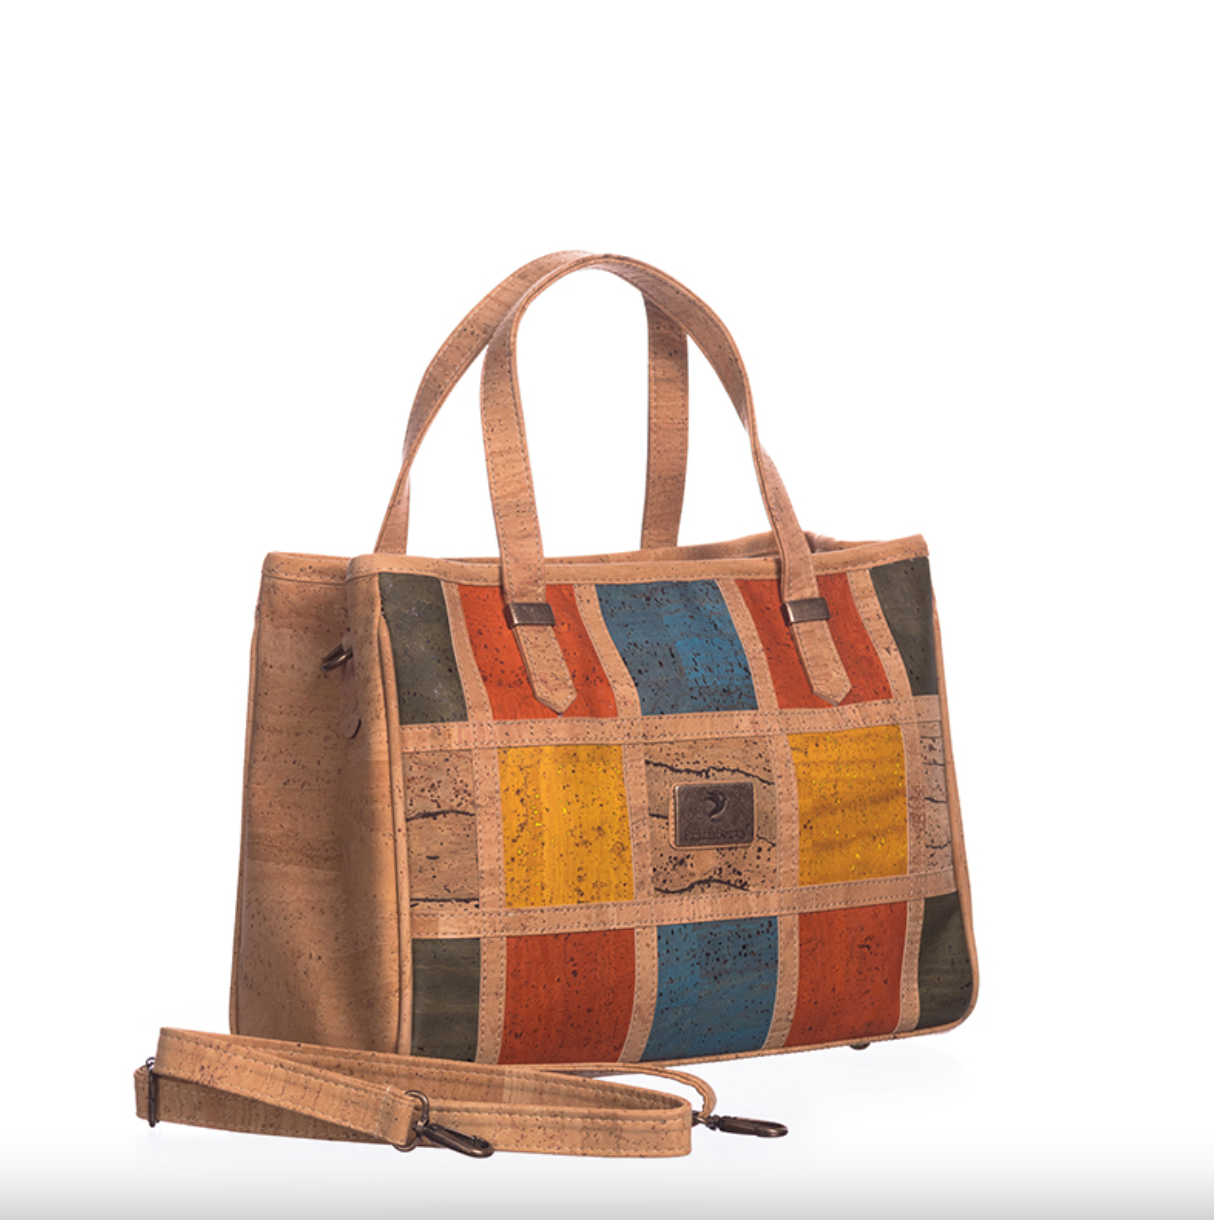 nest PURE - Handcrafted bags using vegan cork leather + organic fabric